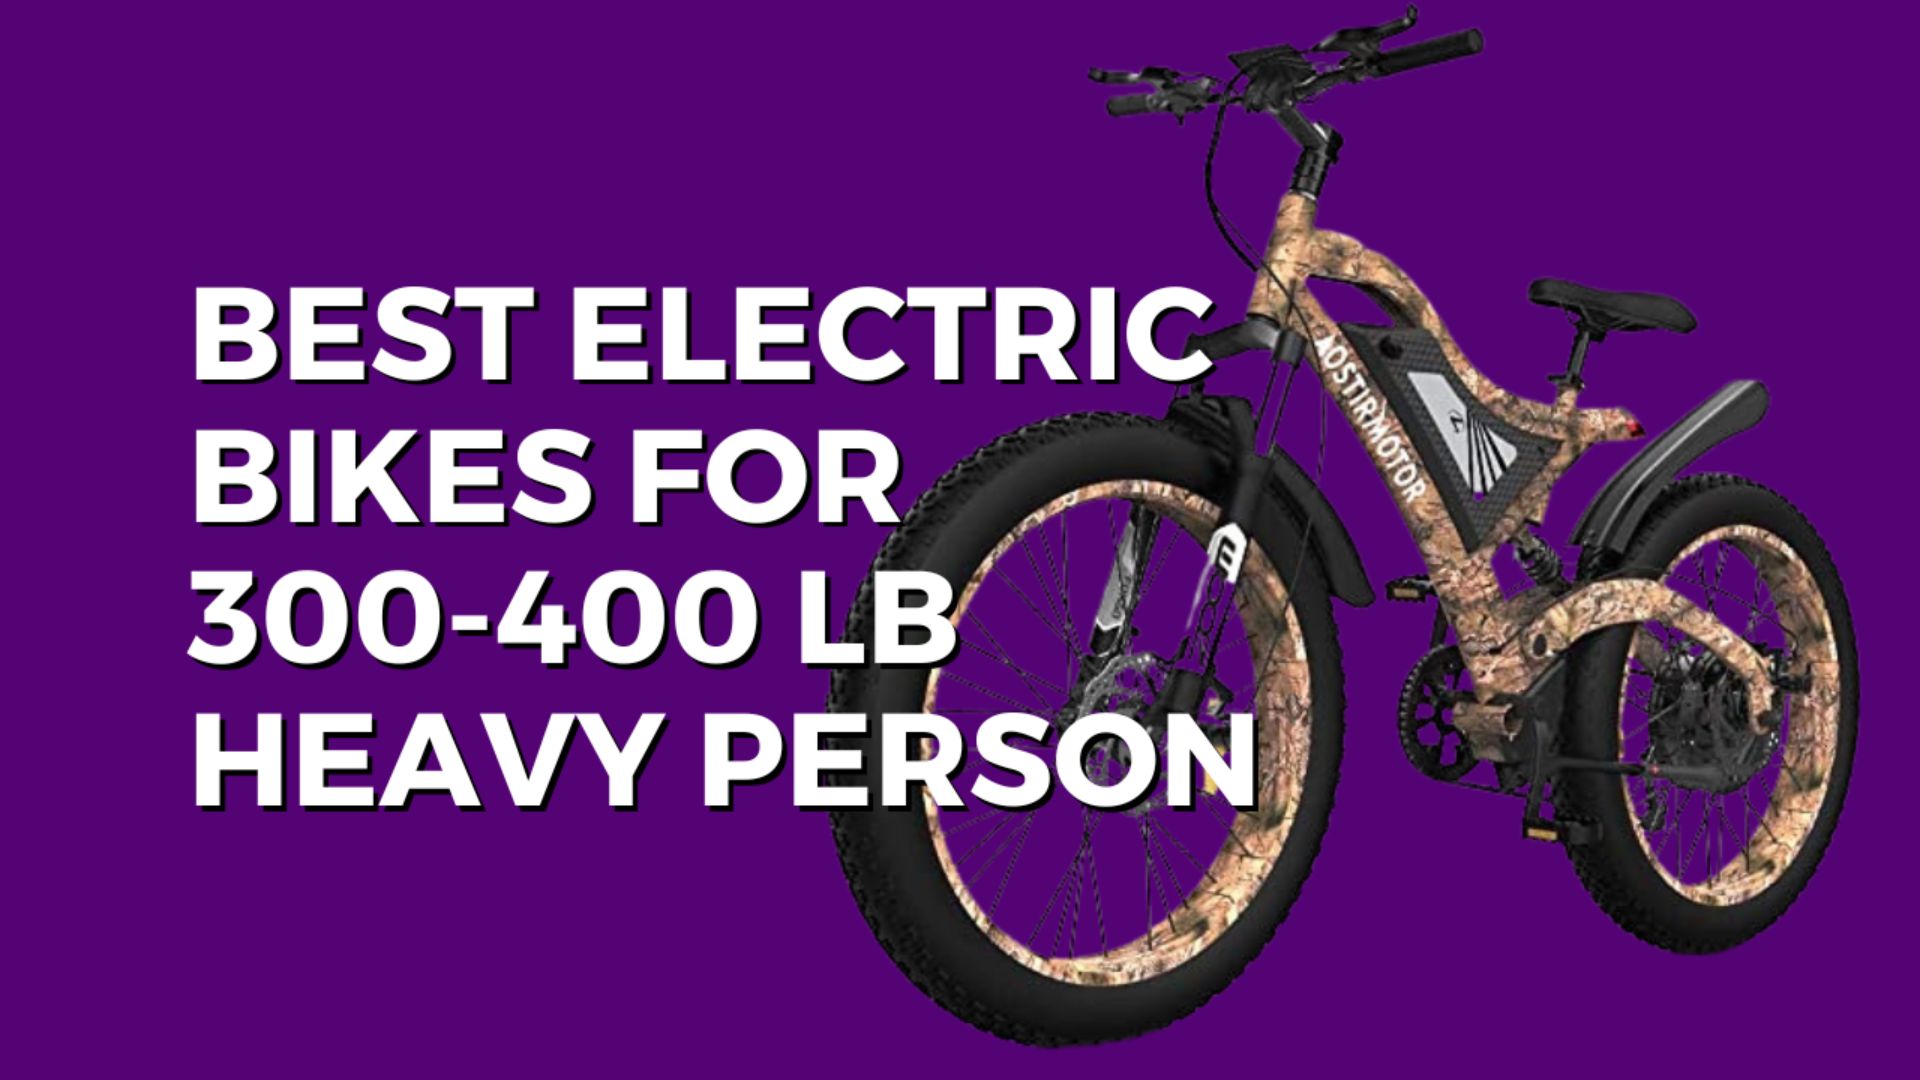 Best Electric Bikes for 300-400 lb Heavy Person